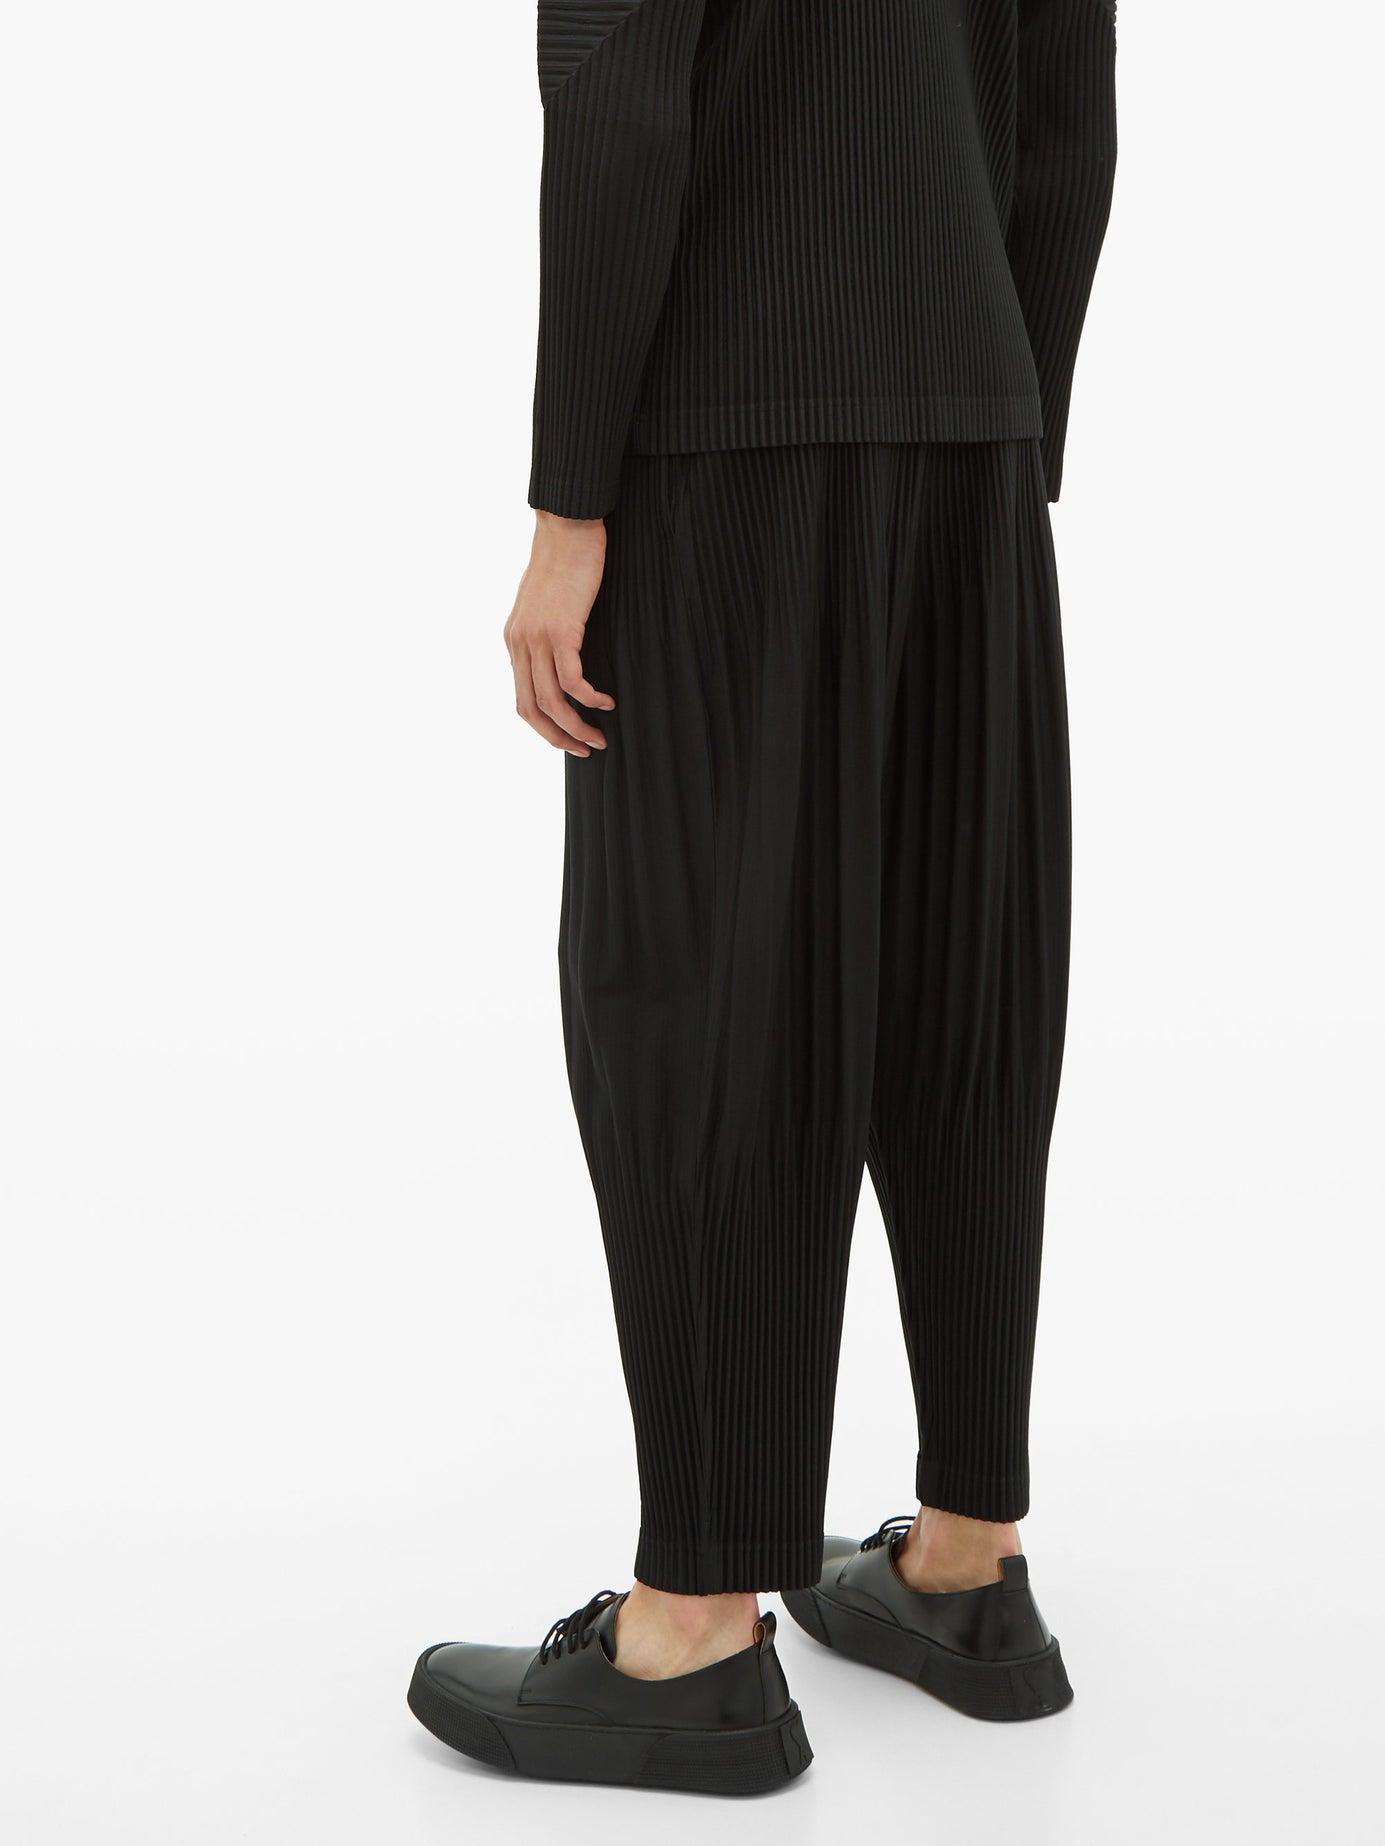 Homme Plissé Issey Miyake Pleated Tapered Trousers in Black for Men - Lyst